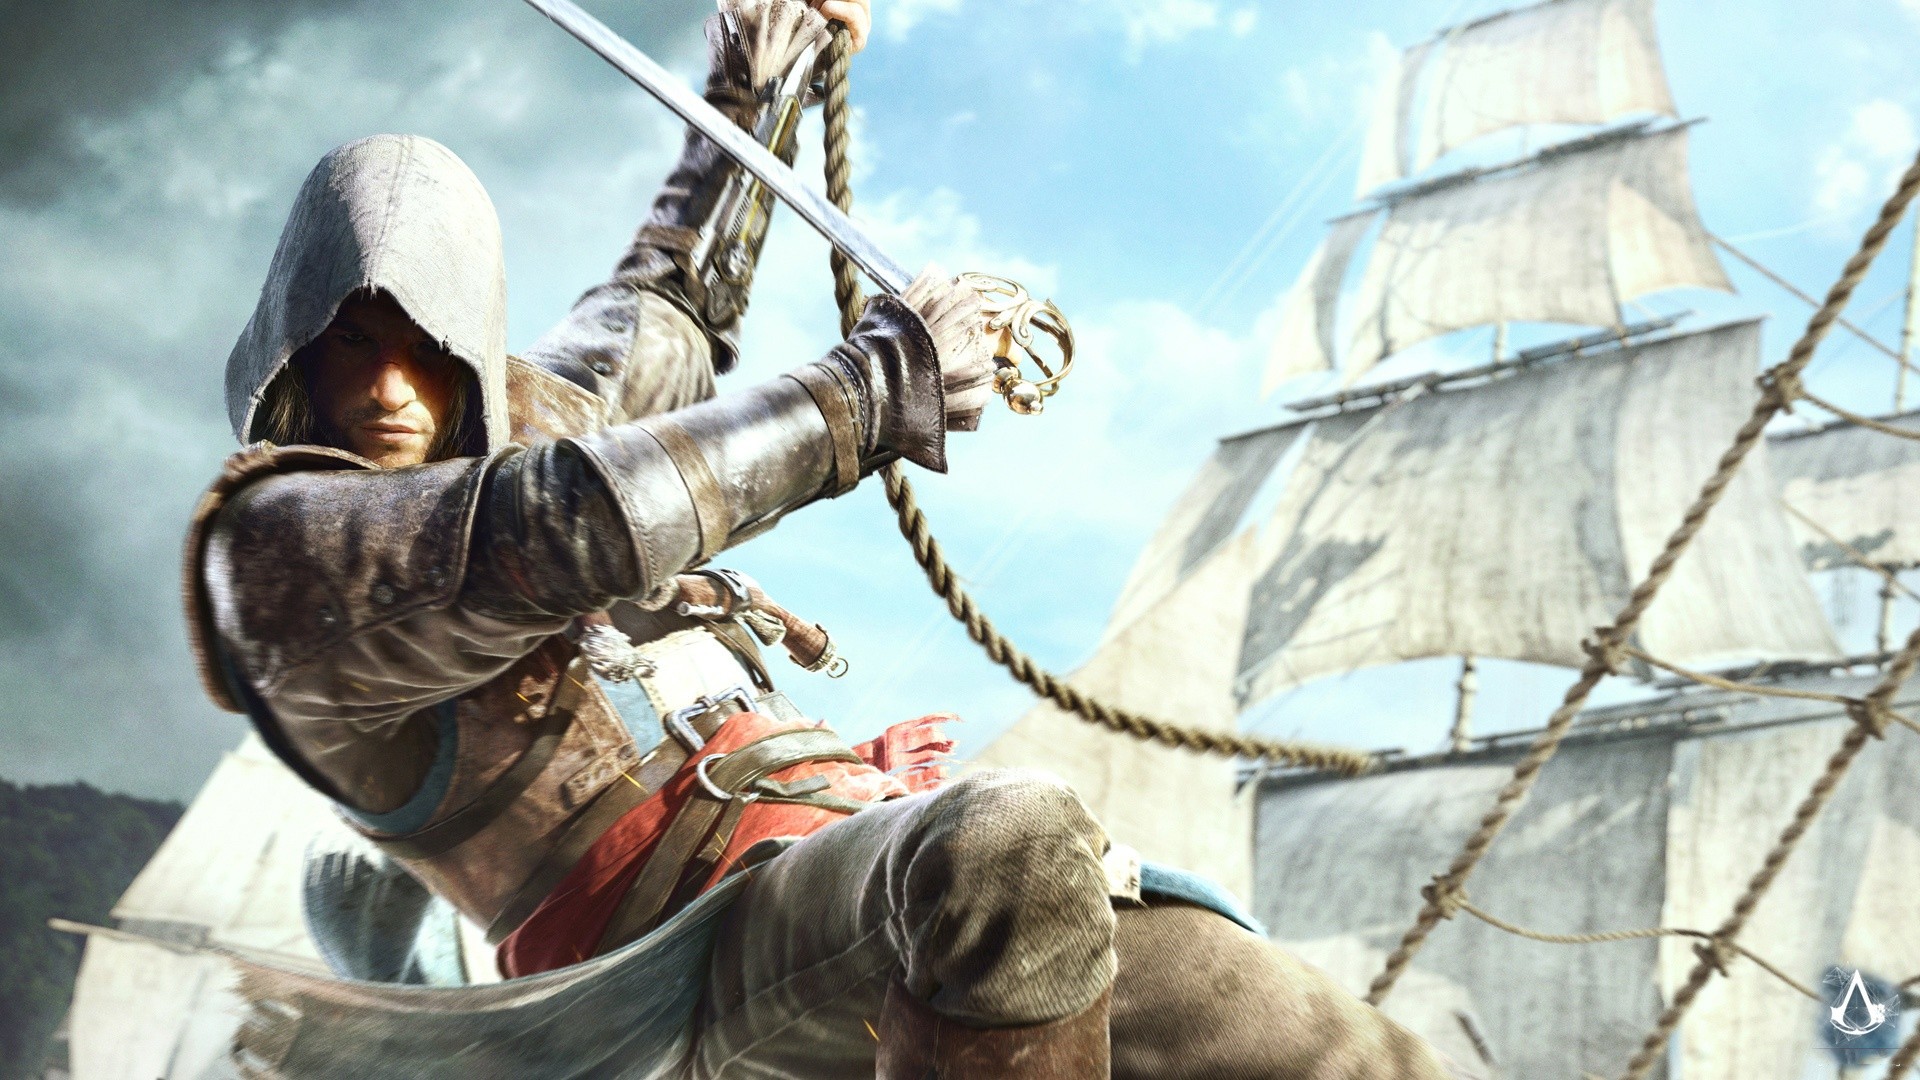 General 1920x1080 video games Assassin's Creed Assassin's Creed: Black Flag video game men video game art